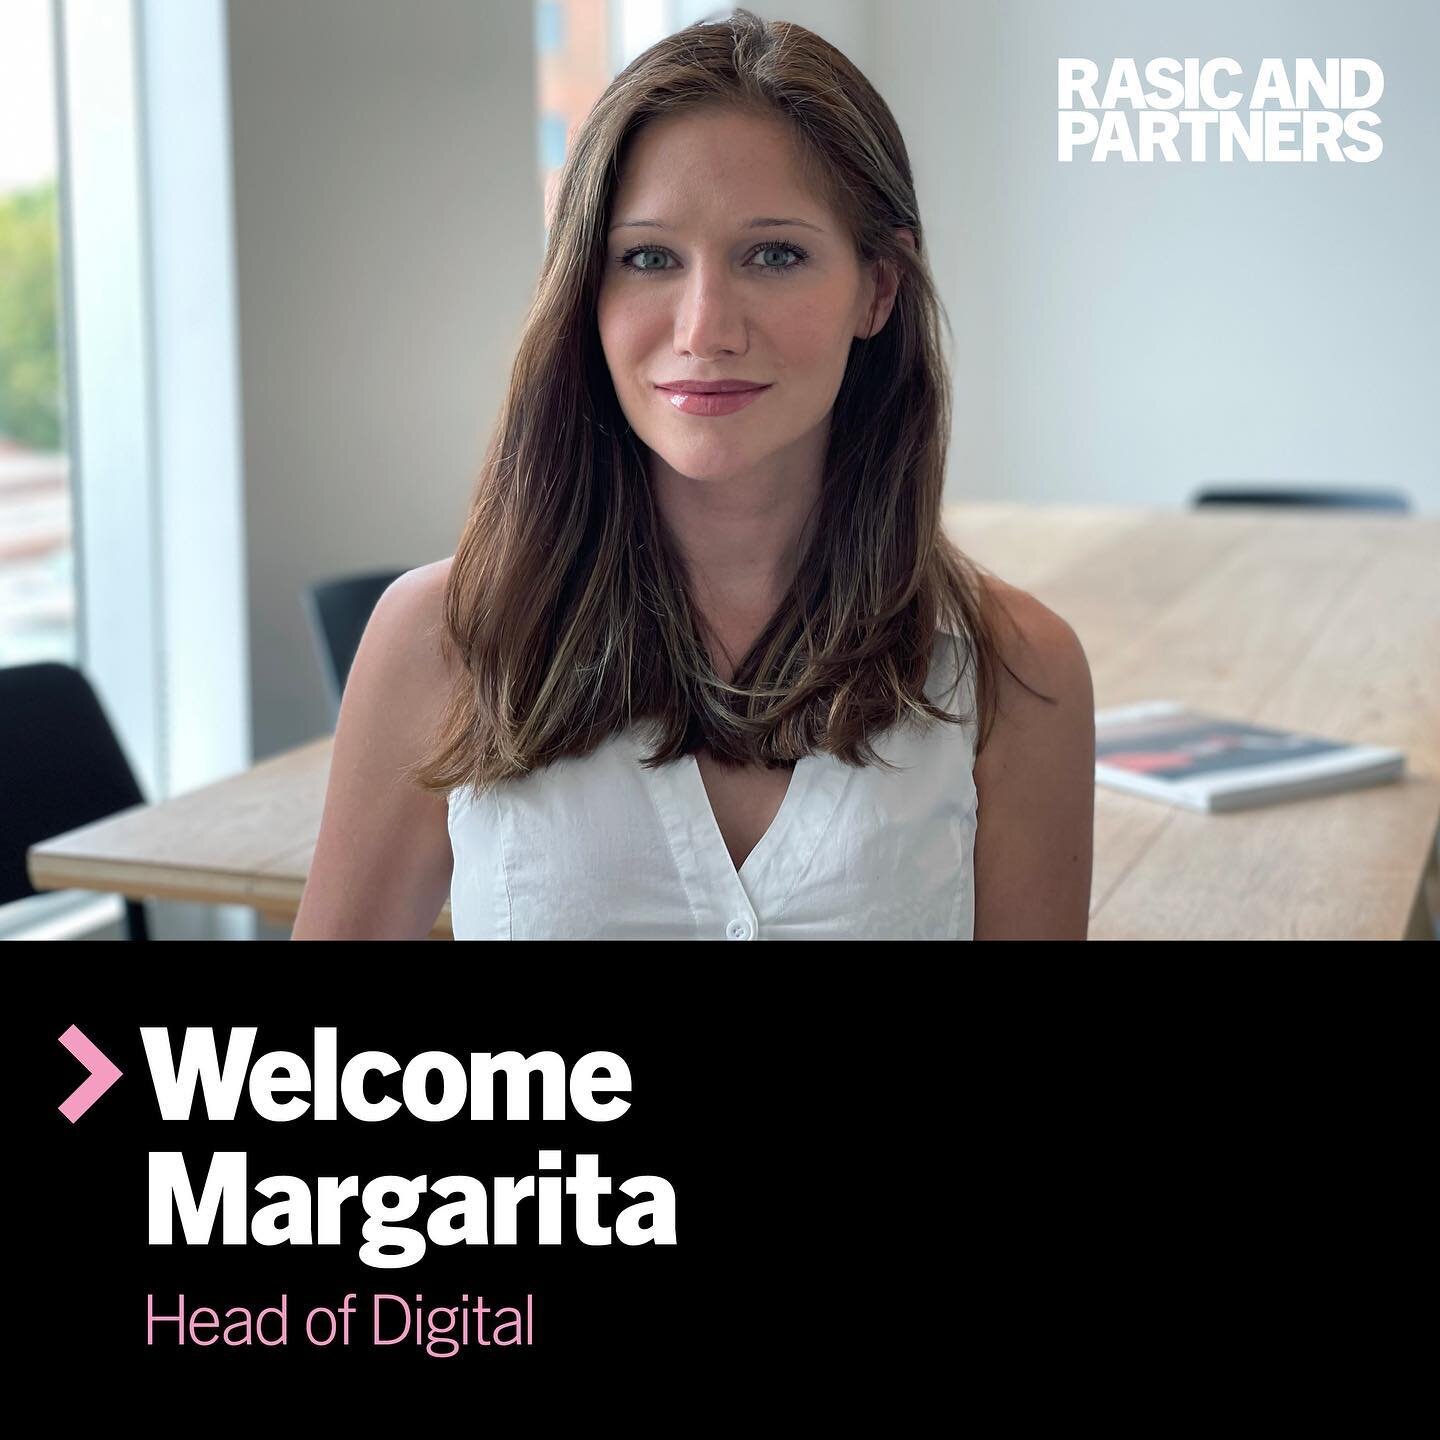 We&rsquo;re super happy to welcome Margarita Ognjanovic to the team as Head of Digital. She brings over 10 years experience across both the client and agency side. 
.
.
#advertising #digitalmarketing #creative #digital